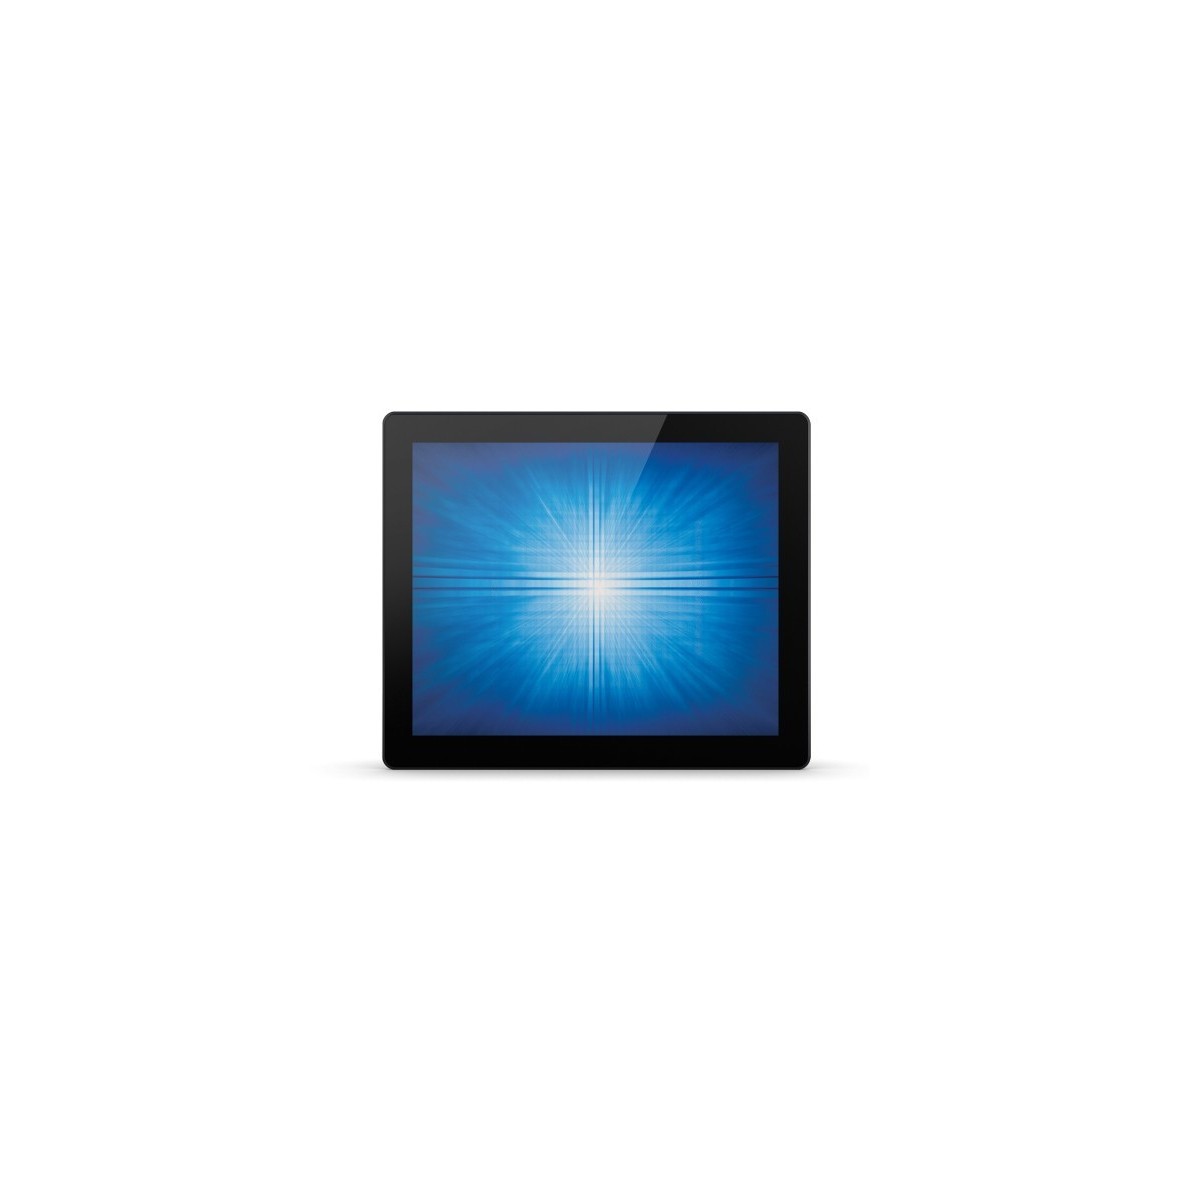 Elo Touch Solutions Elo Touch Solution 1790L - 43.2 cm (17) - 200 cd/m² - LCD/TFT - 5 ms - 1000:1 - 1280 x 1024 pixels